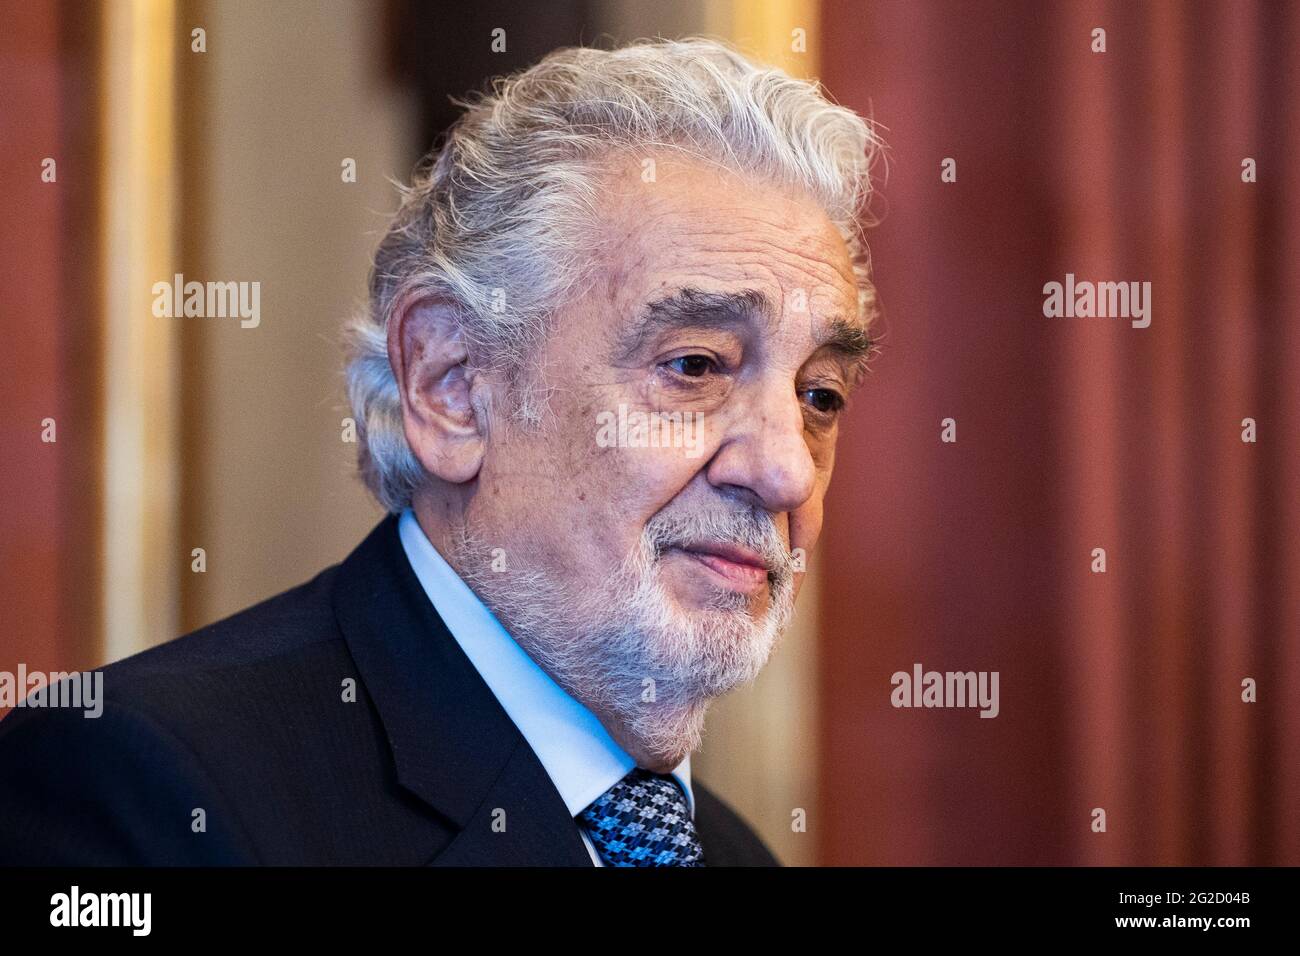 The tenor Placido Domingo makes a speech as he receives the title of 'Honorary Ambassador of the World Heritage of Spain' at the Teatro Real, Madrid. Domingo receives this title coinciding with his return to Spain to perform at two concerts, in Madrid and Marbella. The emblem is given to him by the association ADIPROPE (Association for the Diffusion and Promotion of the World Heritage of Spain), dedicated to caring for and promoting knowledge of Spain's World Heritage. Stock Photo